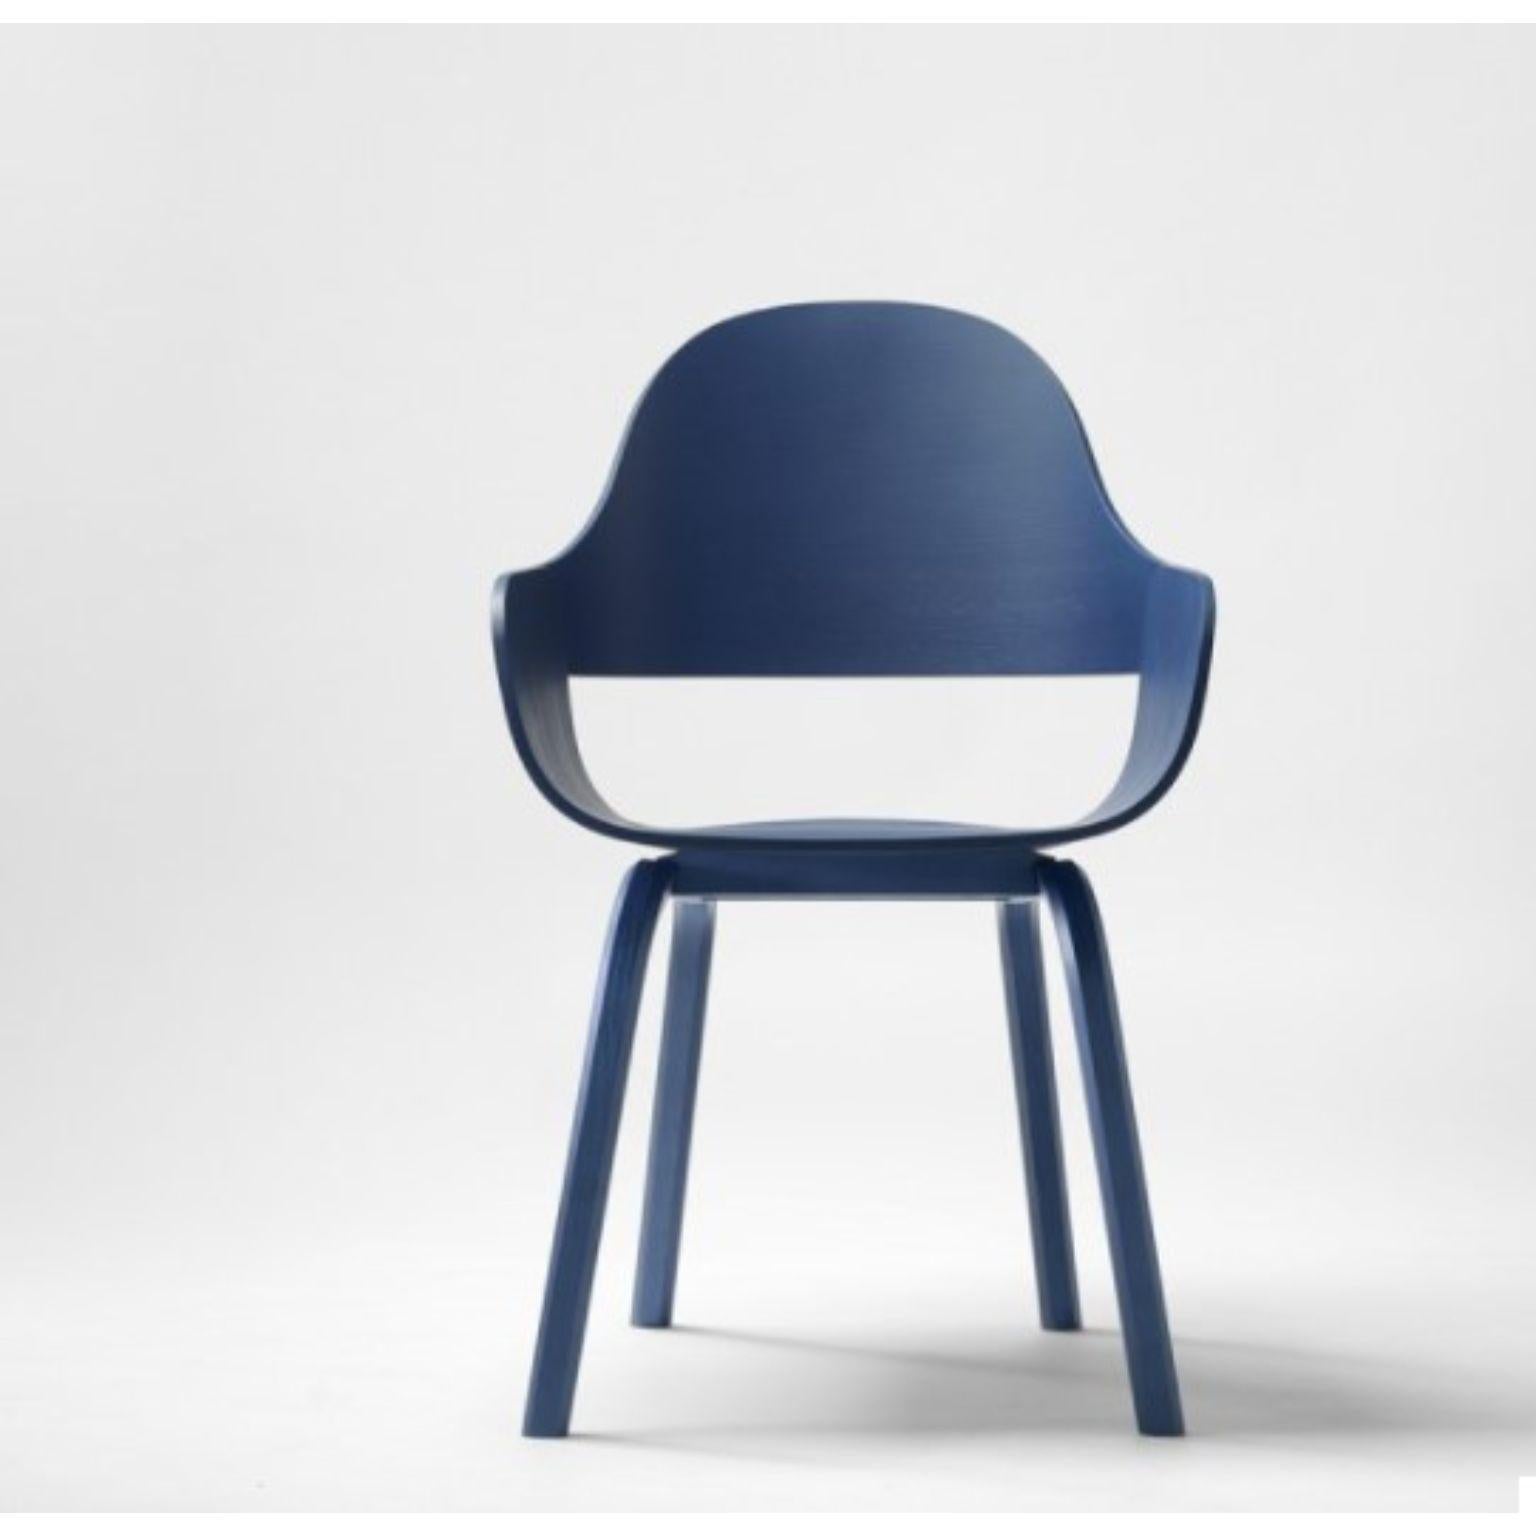 Showtime nude 4 legs blue chair by Jaime Hayon
Dimensions: D 55 x W 55 x H 86 cm 
Materials: Powder-coated steel or aluminum structure. Legs, seat, and backrest in plywood with exteriors in natural ash, walnut, or ash stained black. Metallic